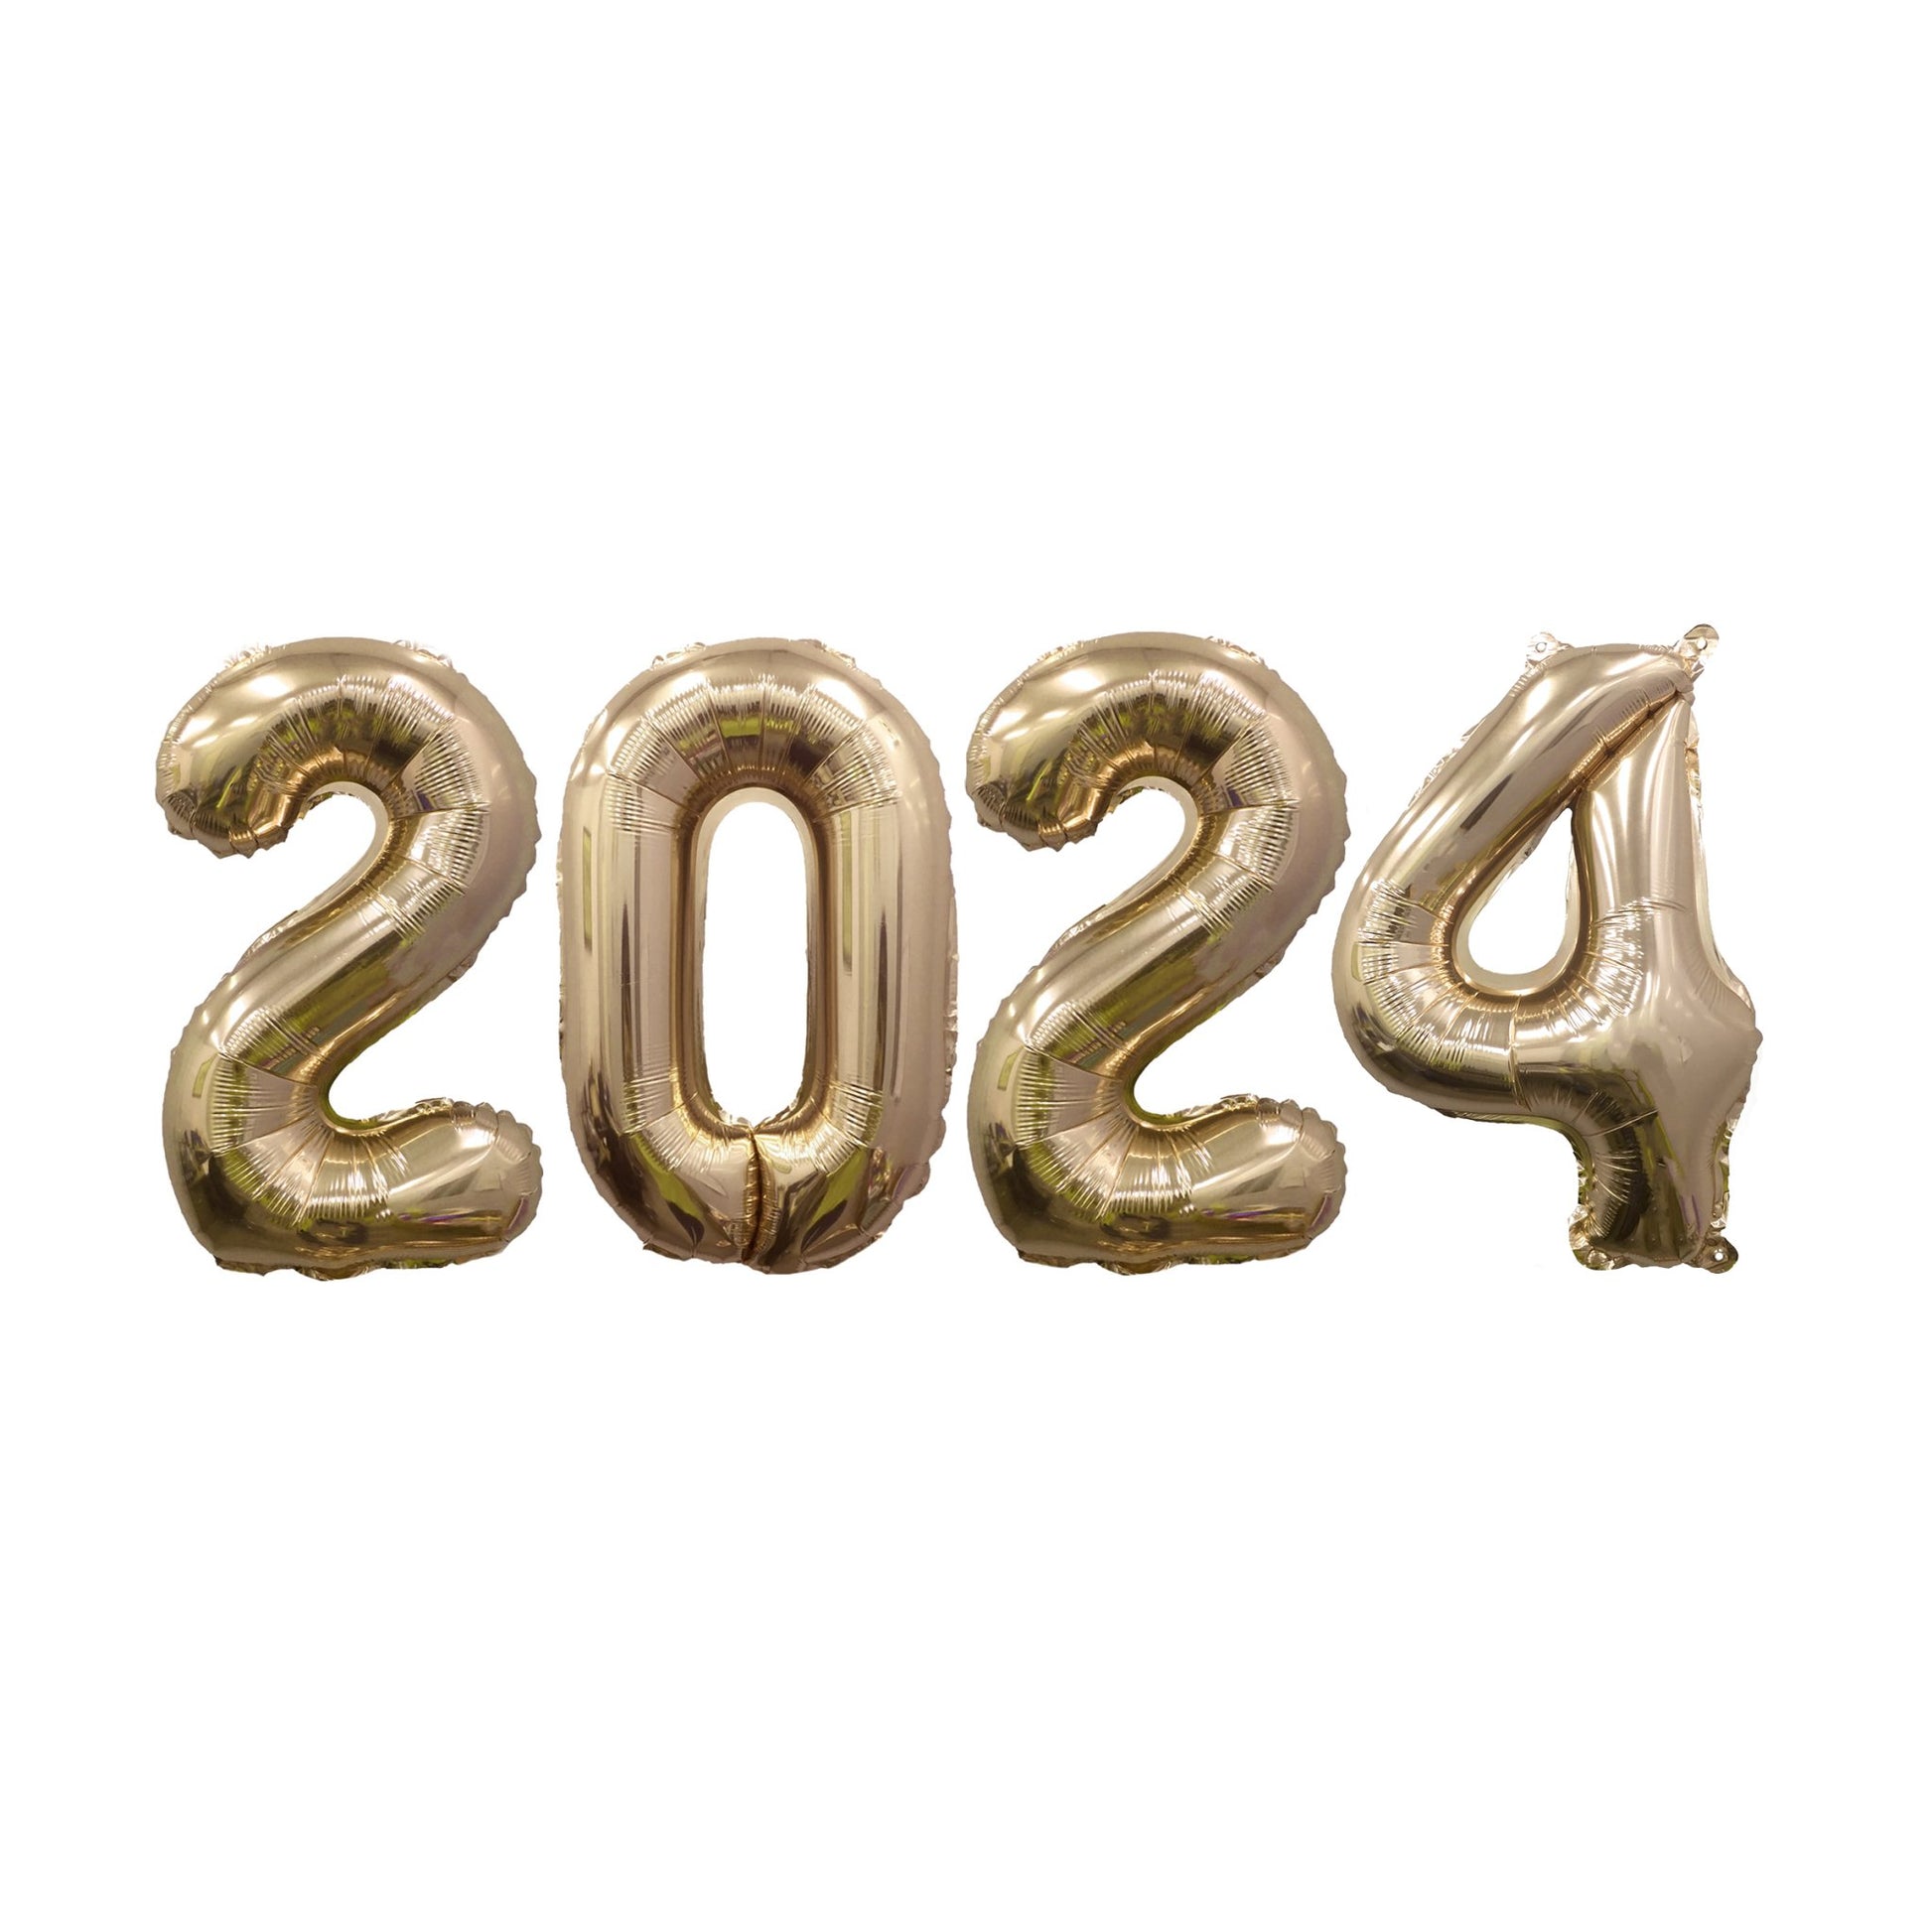 NYE 2024 Giant Gold Mylar Foil Number Balloons 4 Count, 32 New Year Number  Balloons, Jumbo Number Balloons, NYE Party Balloons 